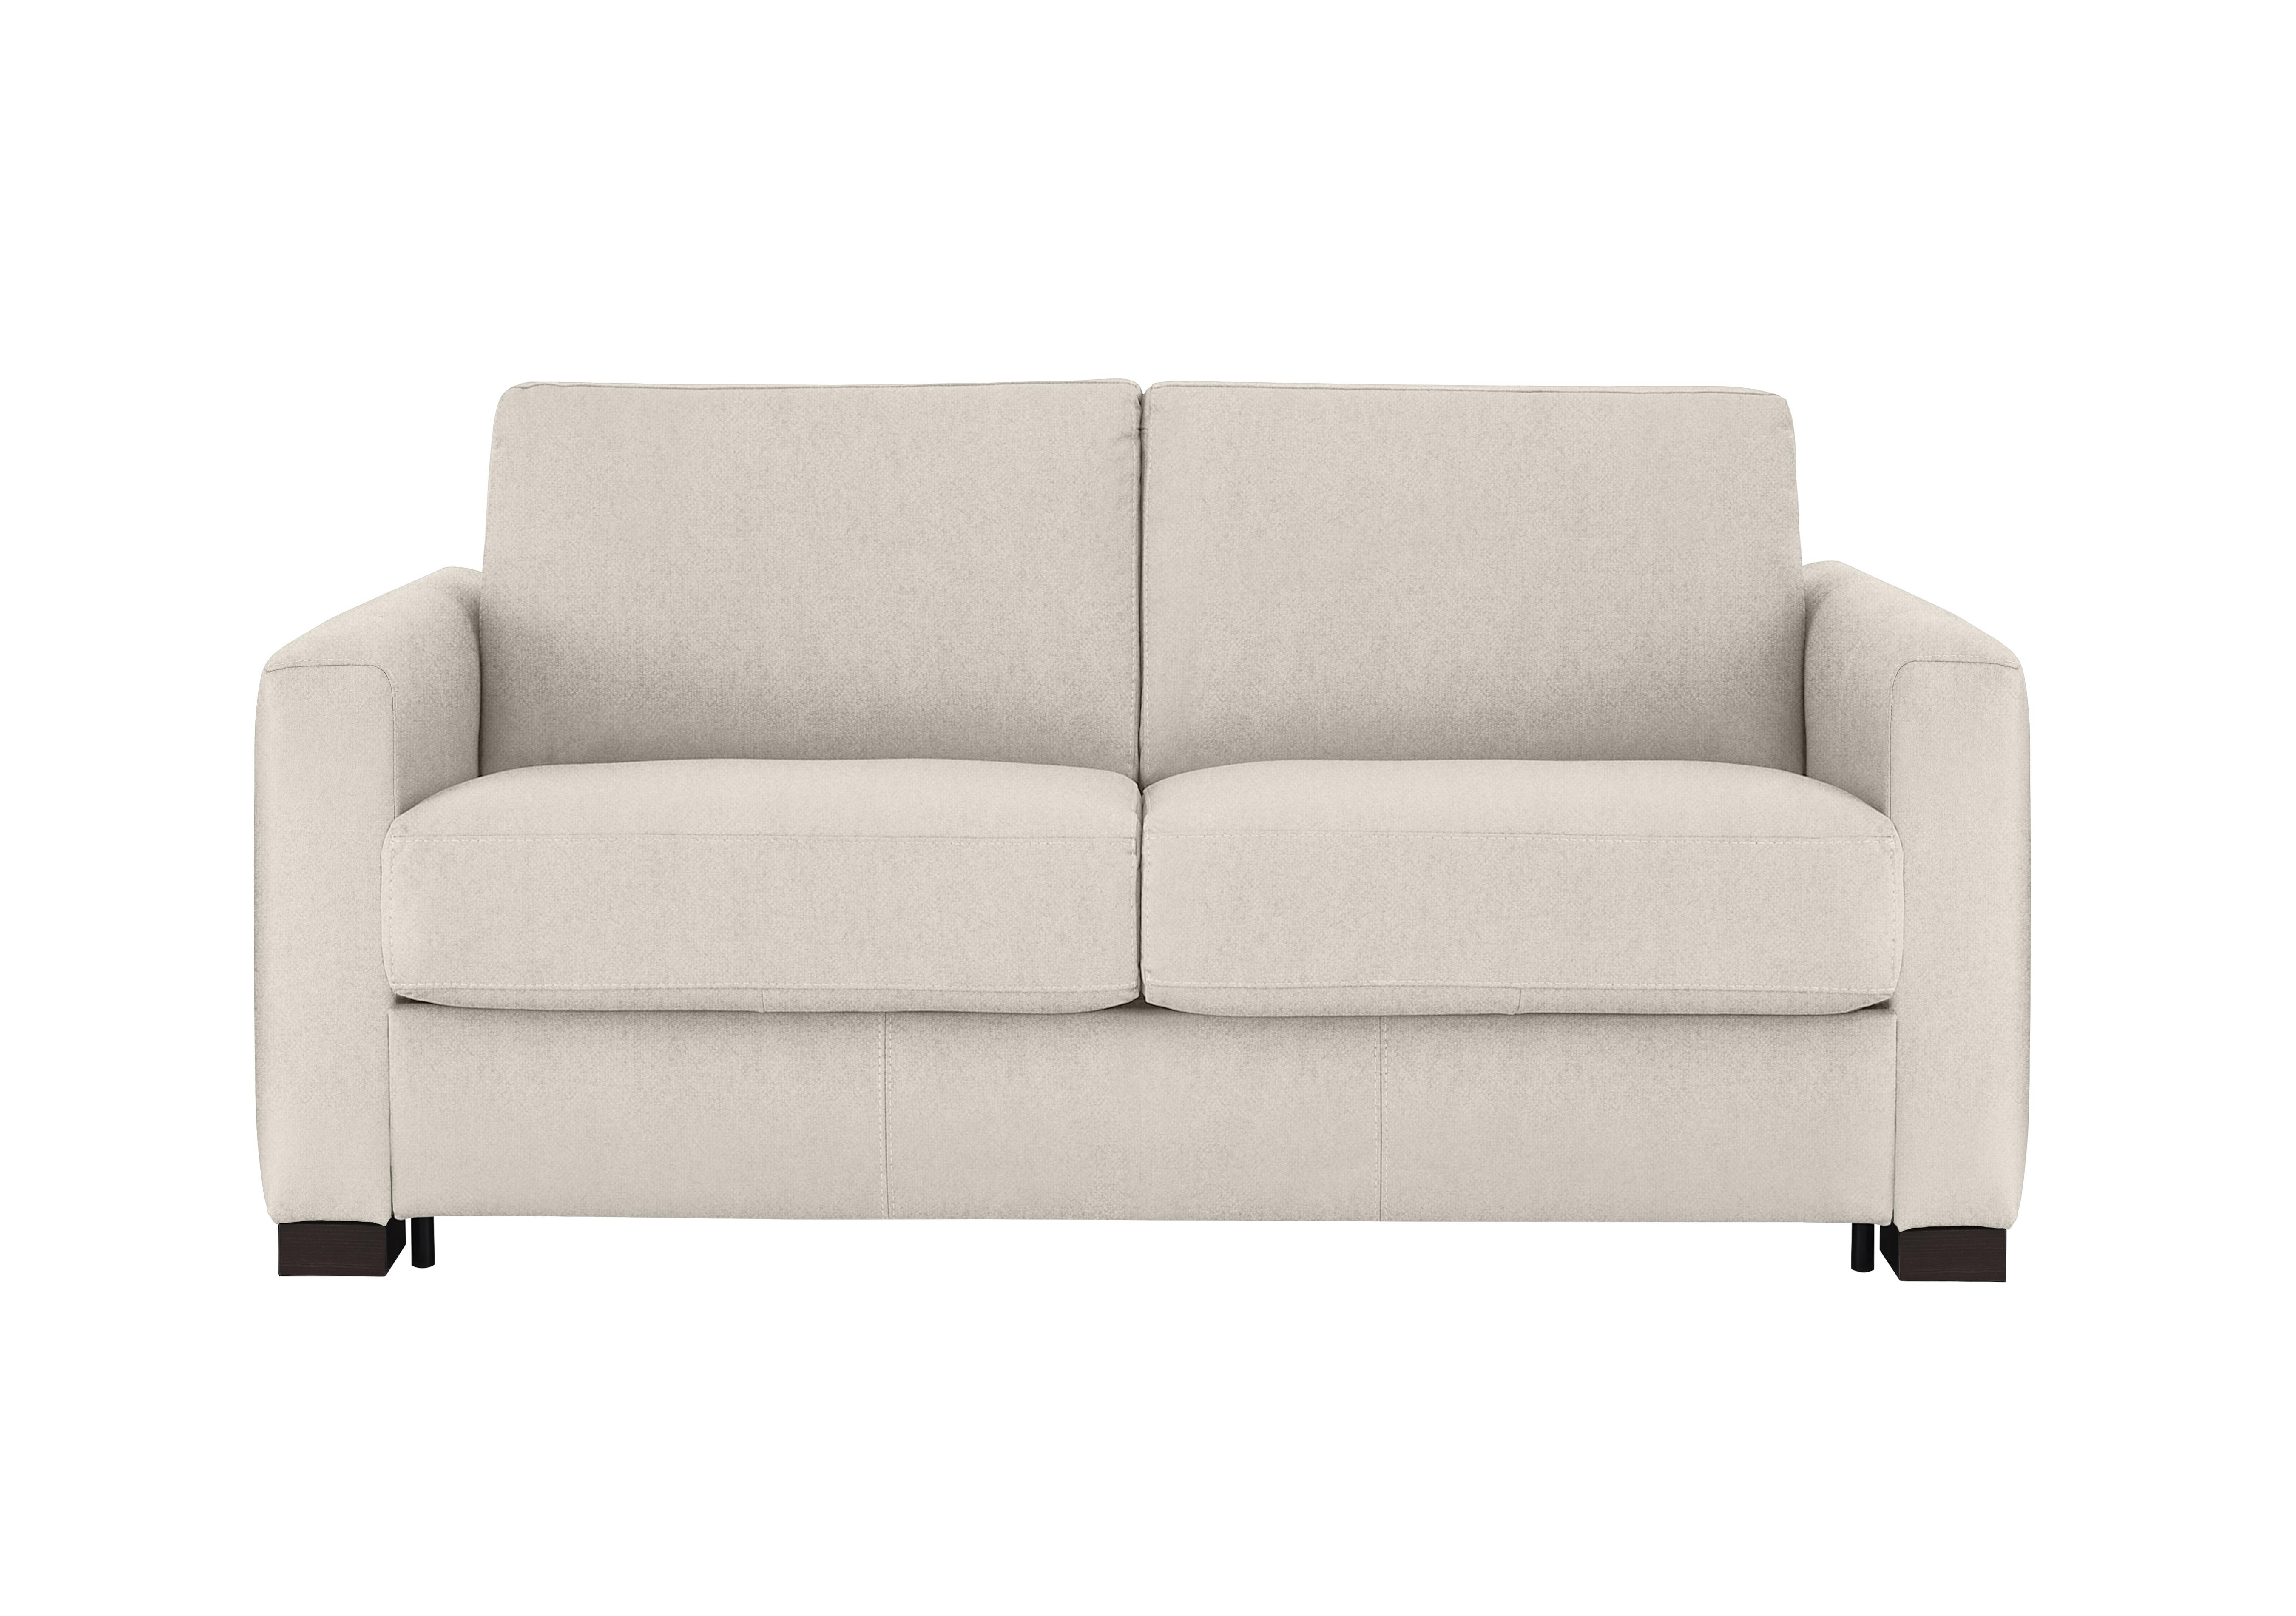 Alcova 2 Seater Fabric Sofa Bed with Box Arms in Fuente Beige on Furniture Village